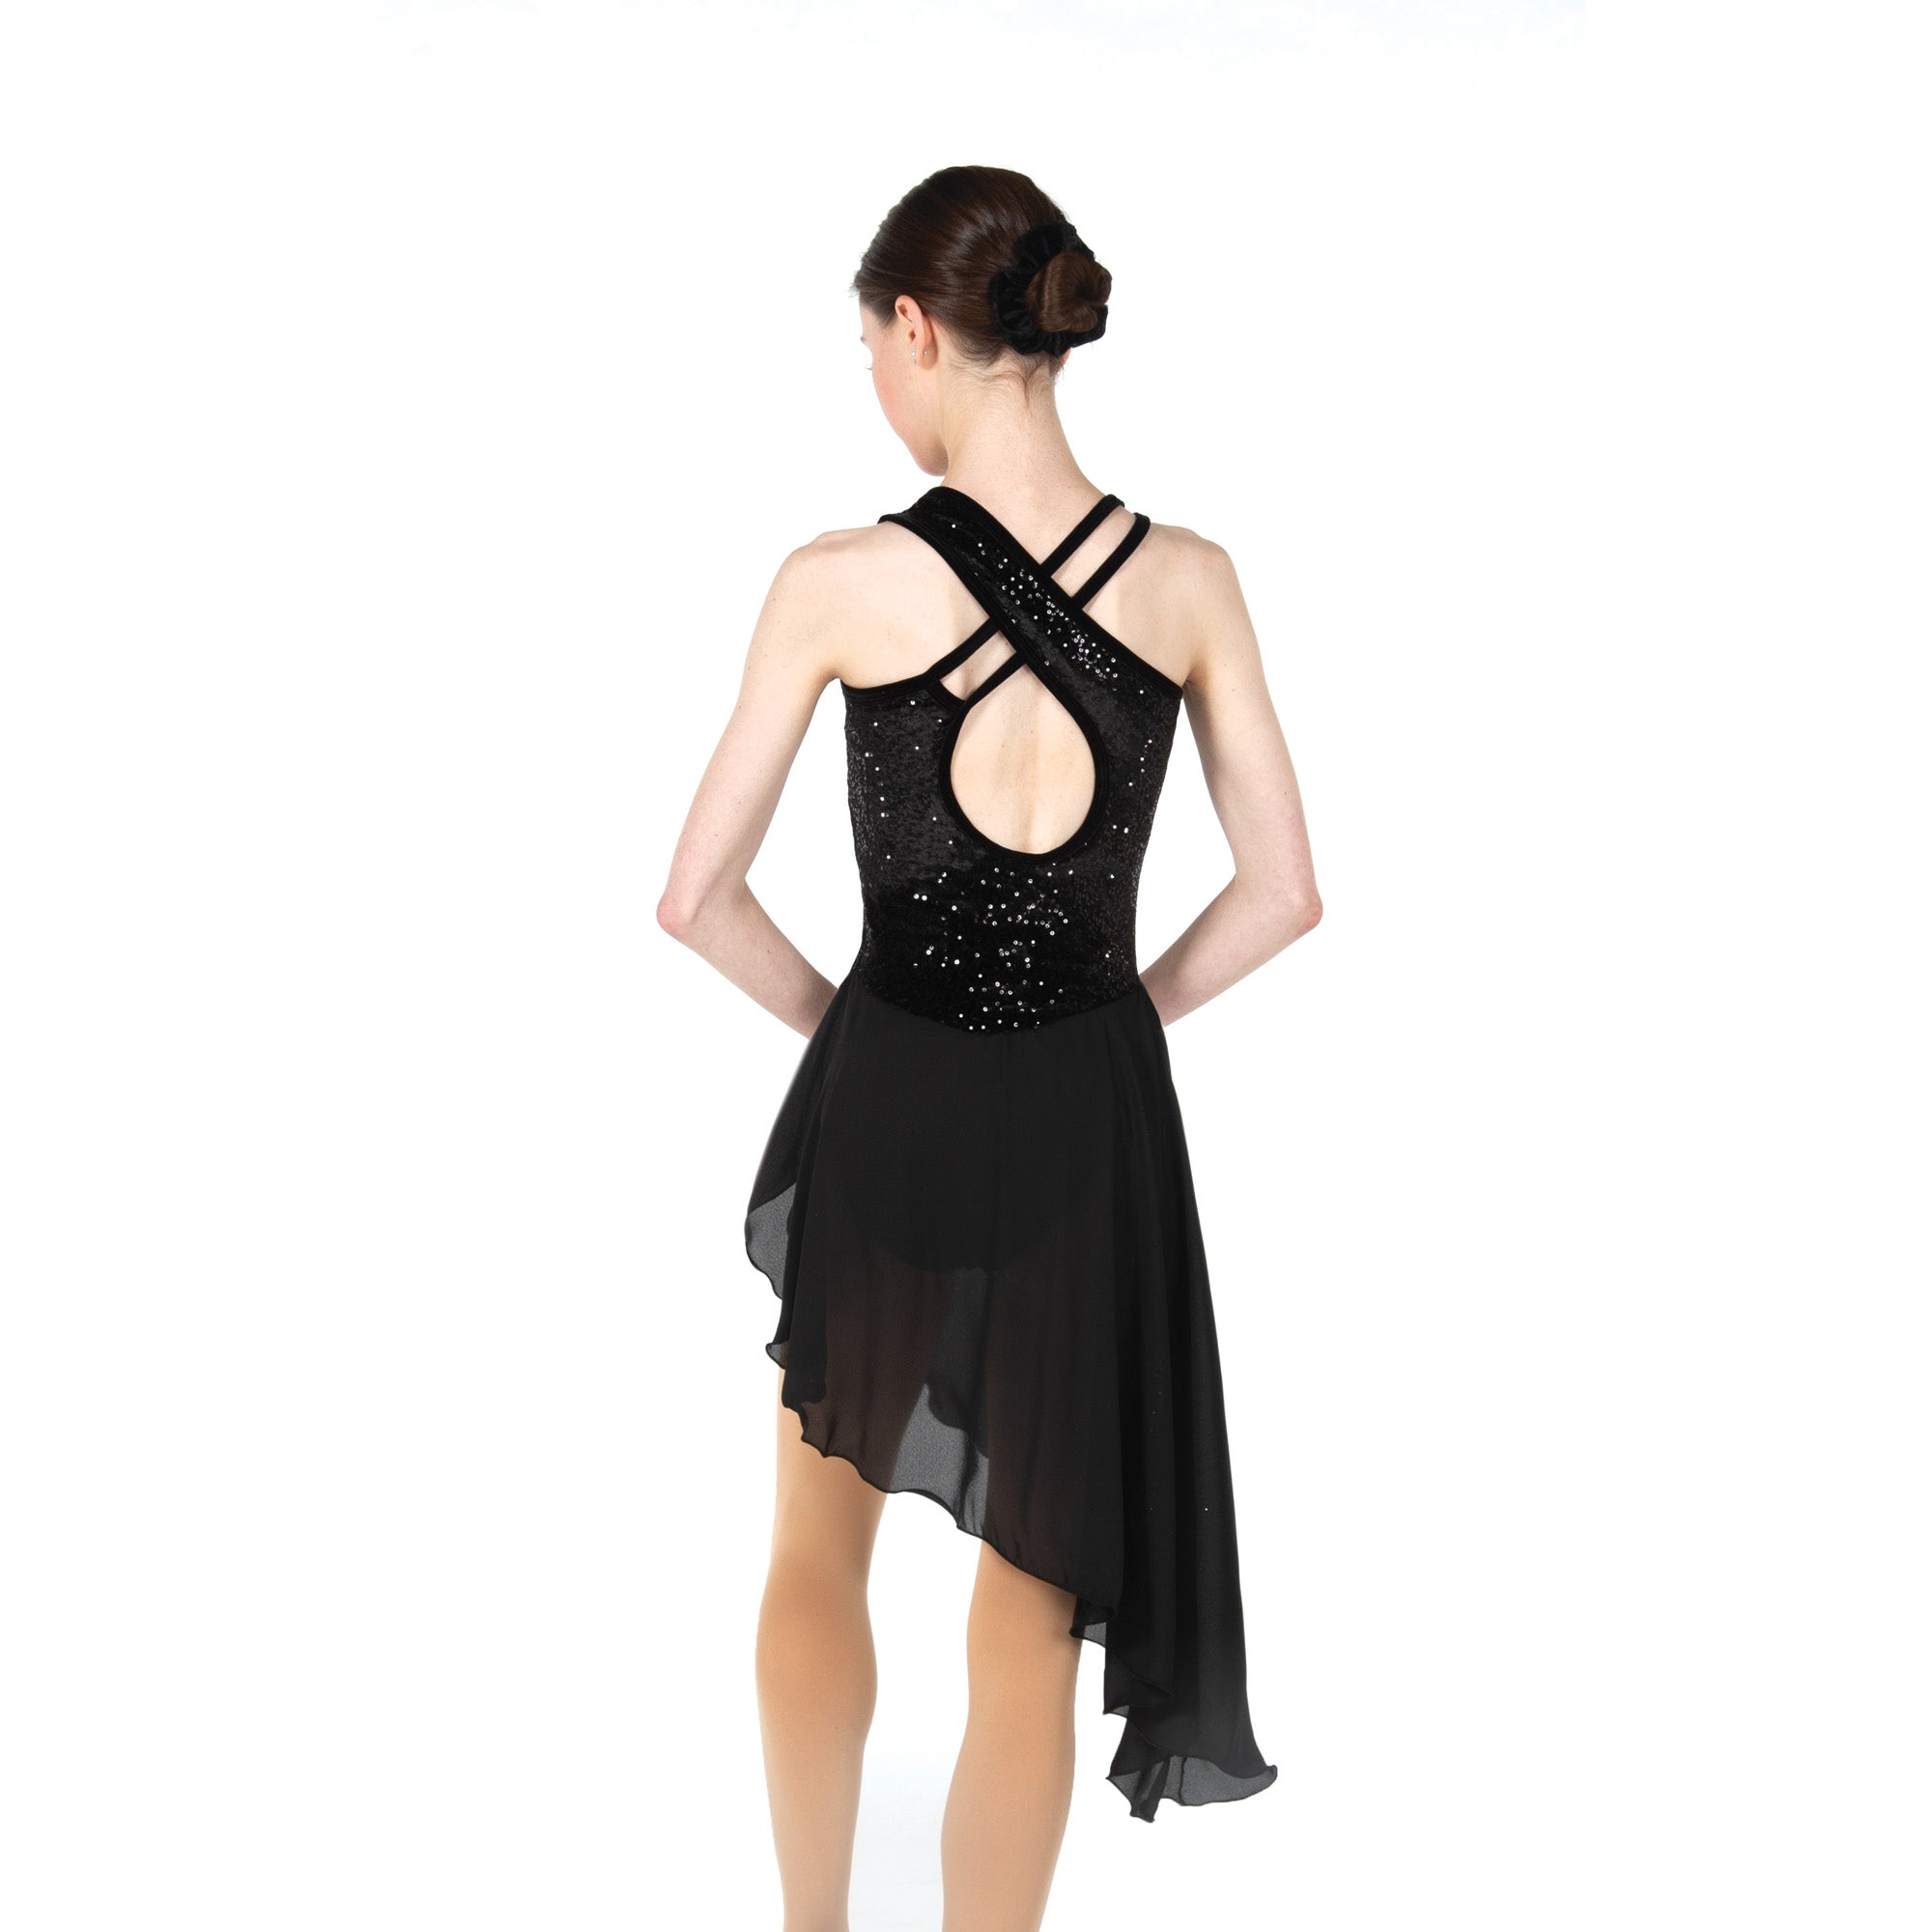 106 Sequin Chasse Dance Dress in black by Jerry's